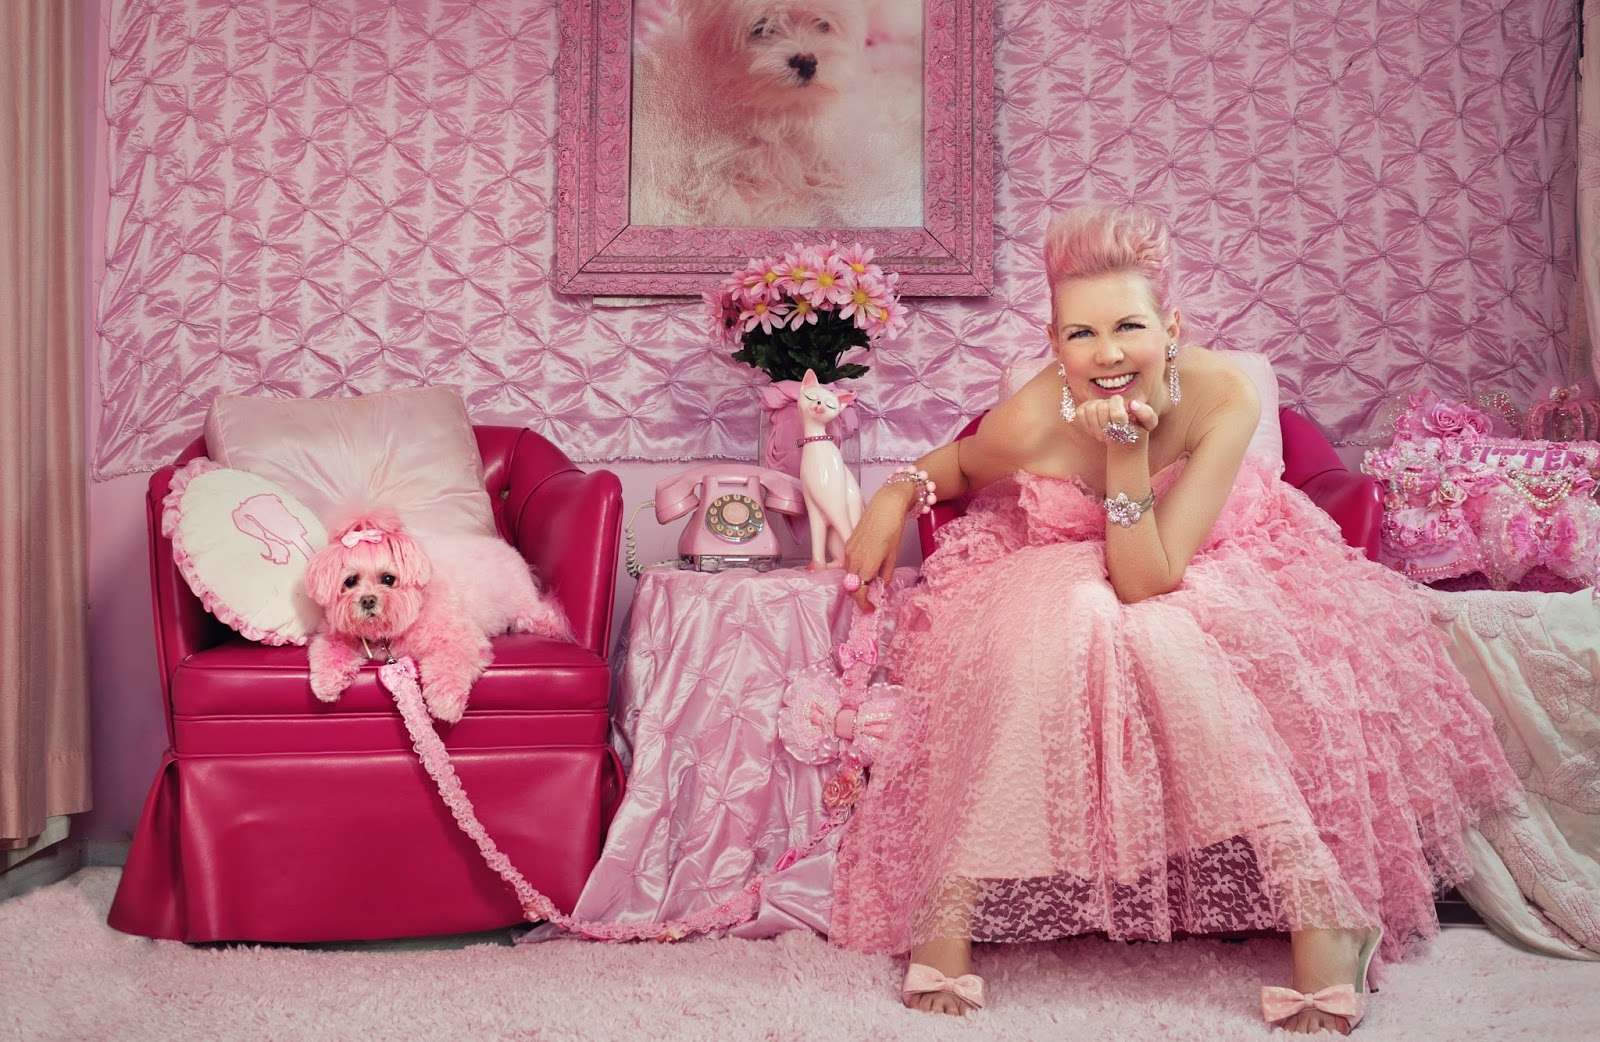 The Pink Lady of Hollywood is KITTEN KAY SERA.